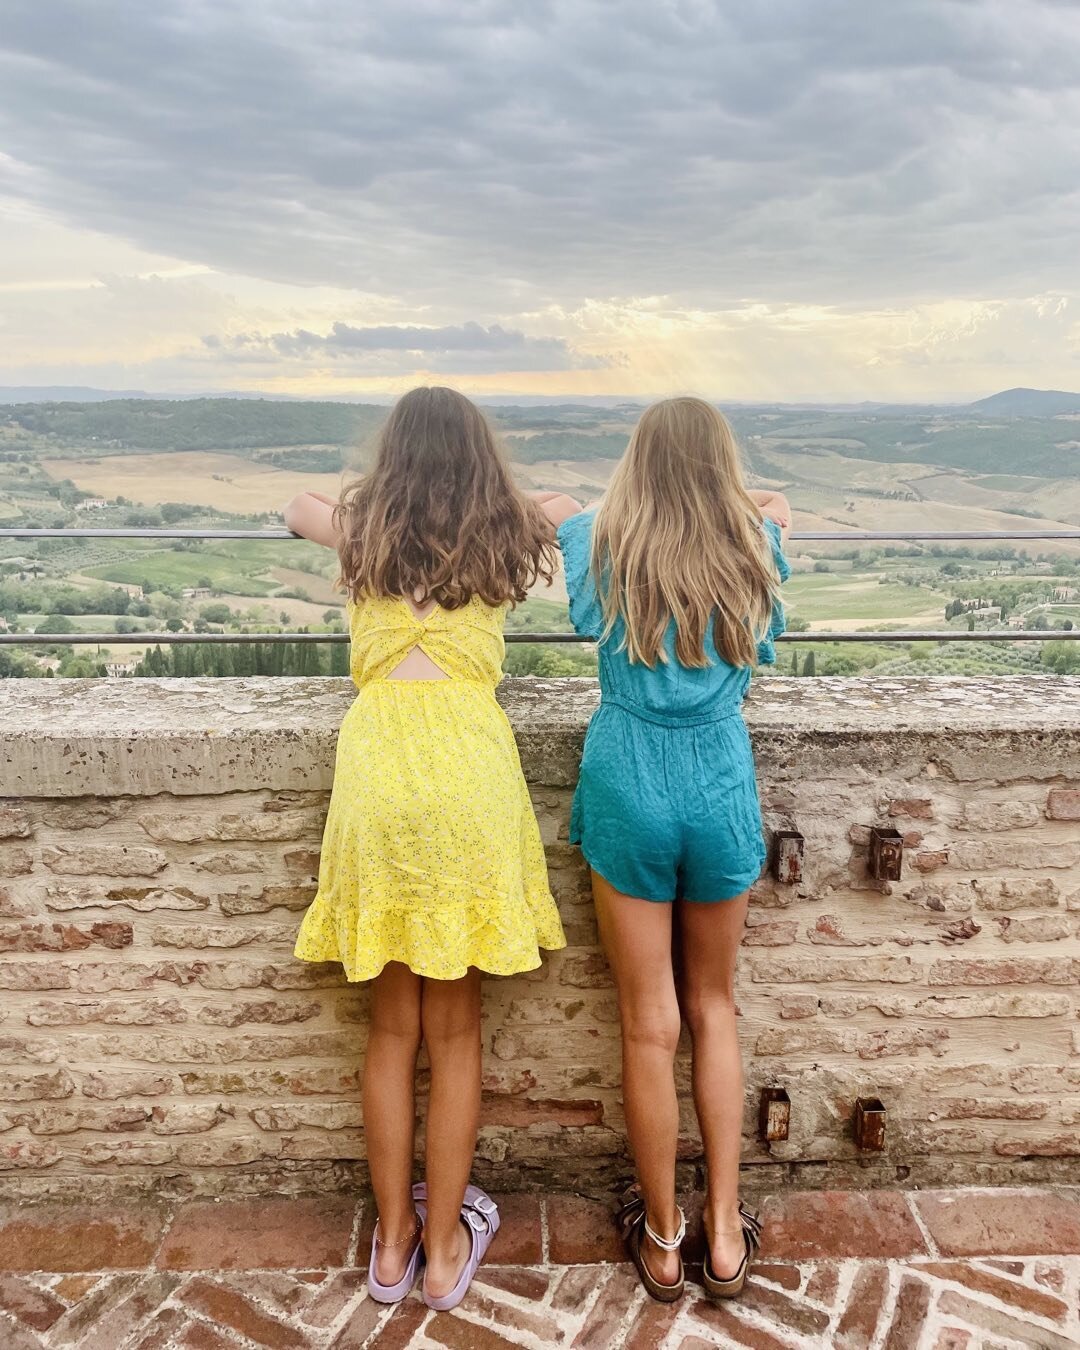 Green screen backdrop? Nope.  #tuscanywithfriends